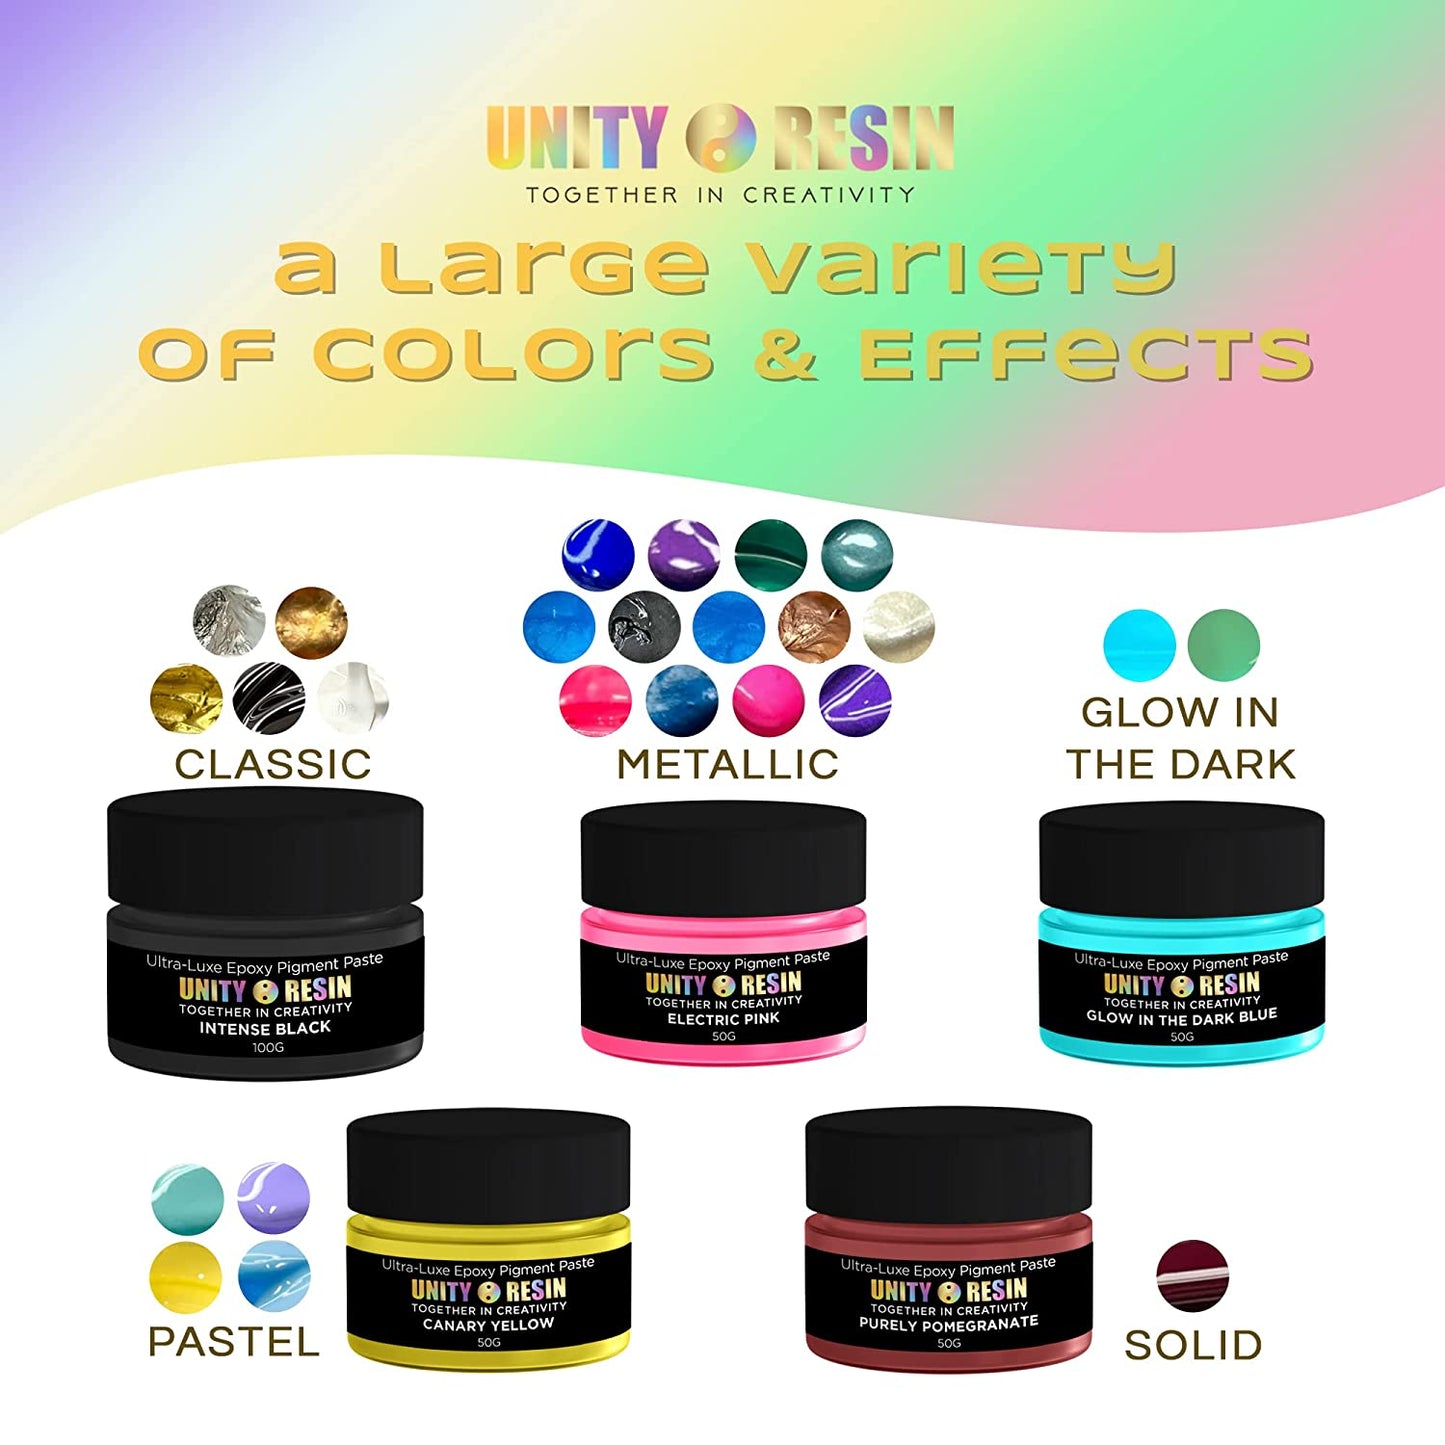 Ultra-Luxe Epoxy Resin Pigment Paste-EXTRAVAGANT GOLD (100G).